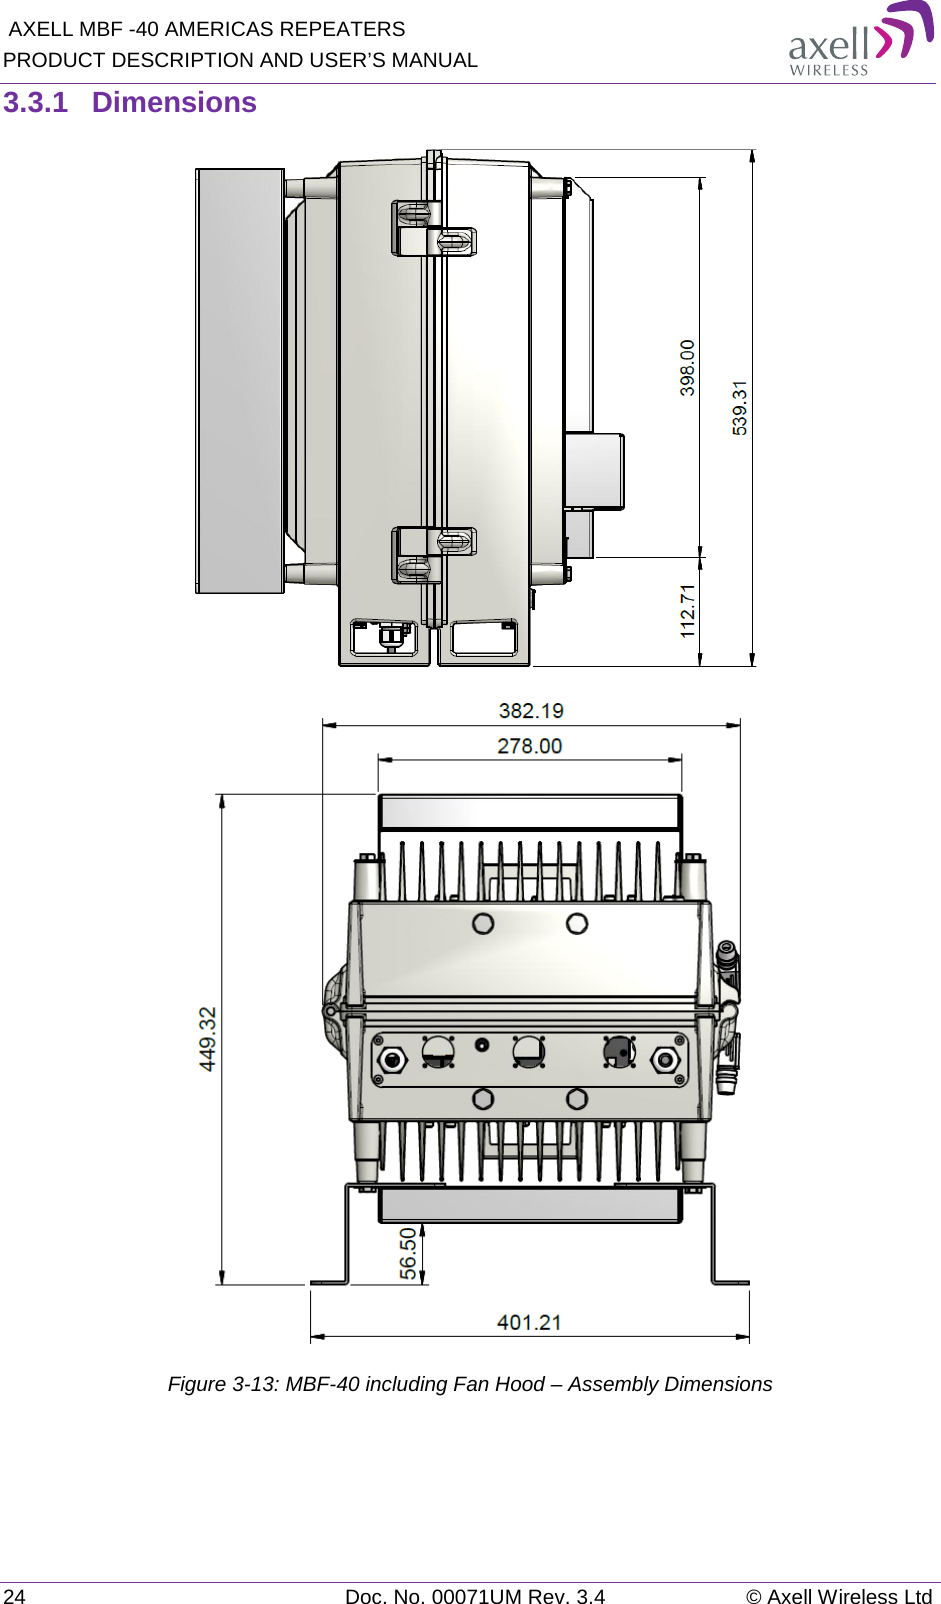  AXELL MBF -40 AMERICAS REPEATERS PRODUCT DESCRIPTION AND USER’S MANUAL 24 Doc. No. 00071UM Rev. 3.4 © Axell Wireless Ltd 3.3.1  Dimensions   Figure  3-13: MBF-40 including Fan Hood – Assembly Dimensions   